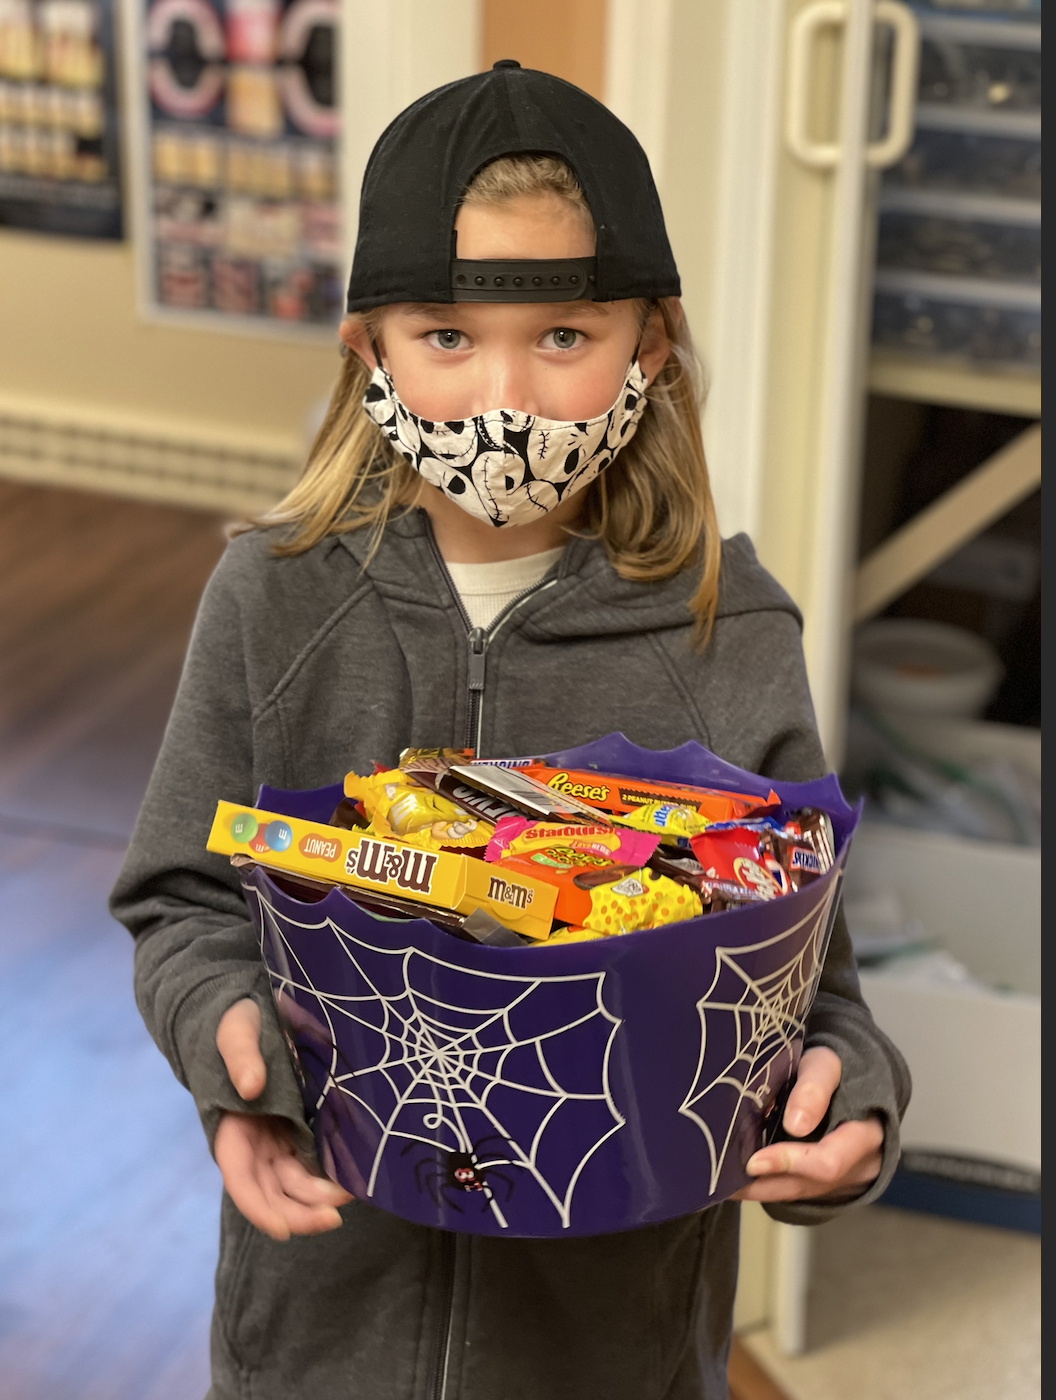 A child wearing a Jack Skellington mask holding a purple bucket of Halloween candy in both hands.